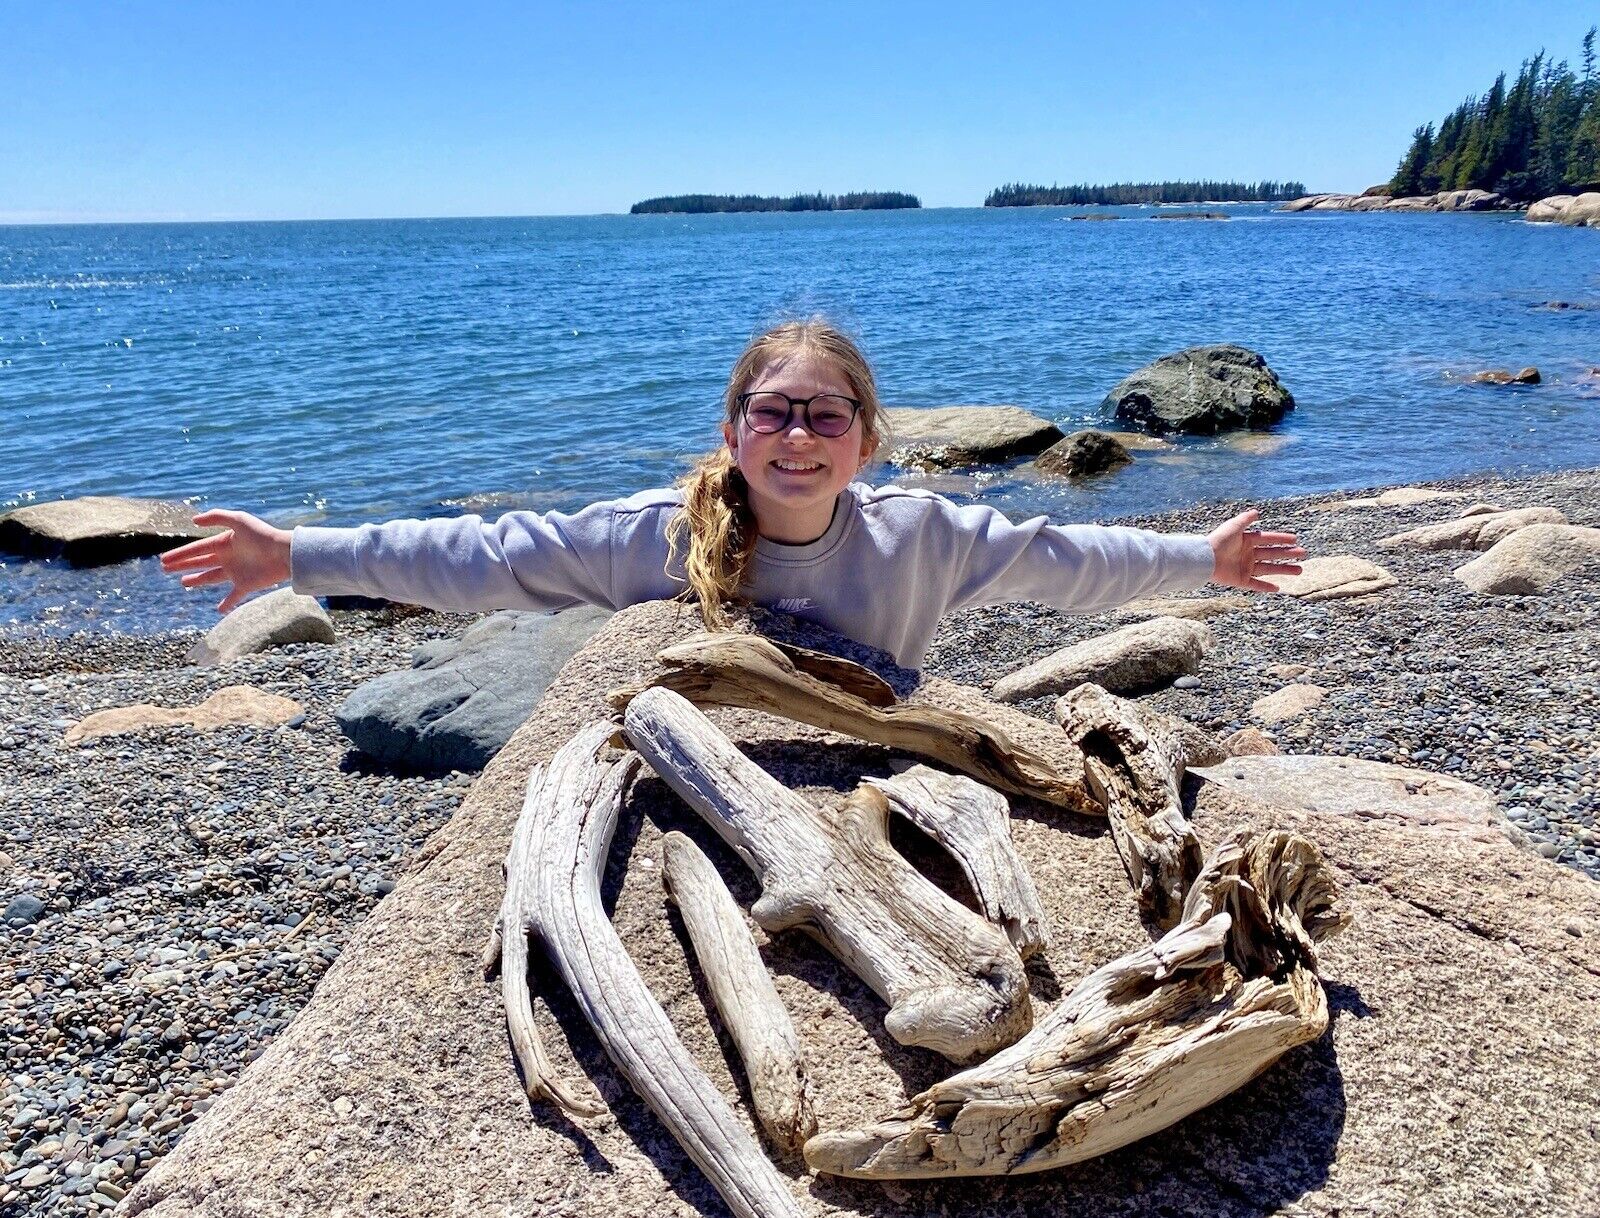 🌊 🪵 Maine-North Atlantic Driftwood, found by 11yr old hiker K. I. Carver.